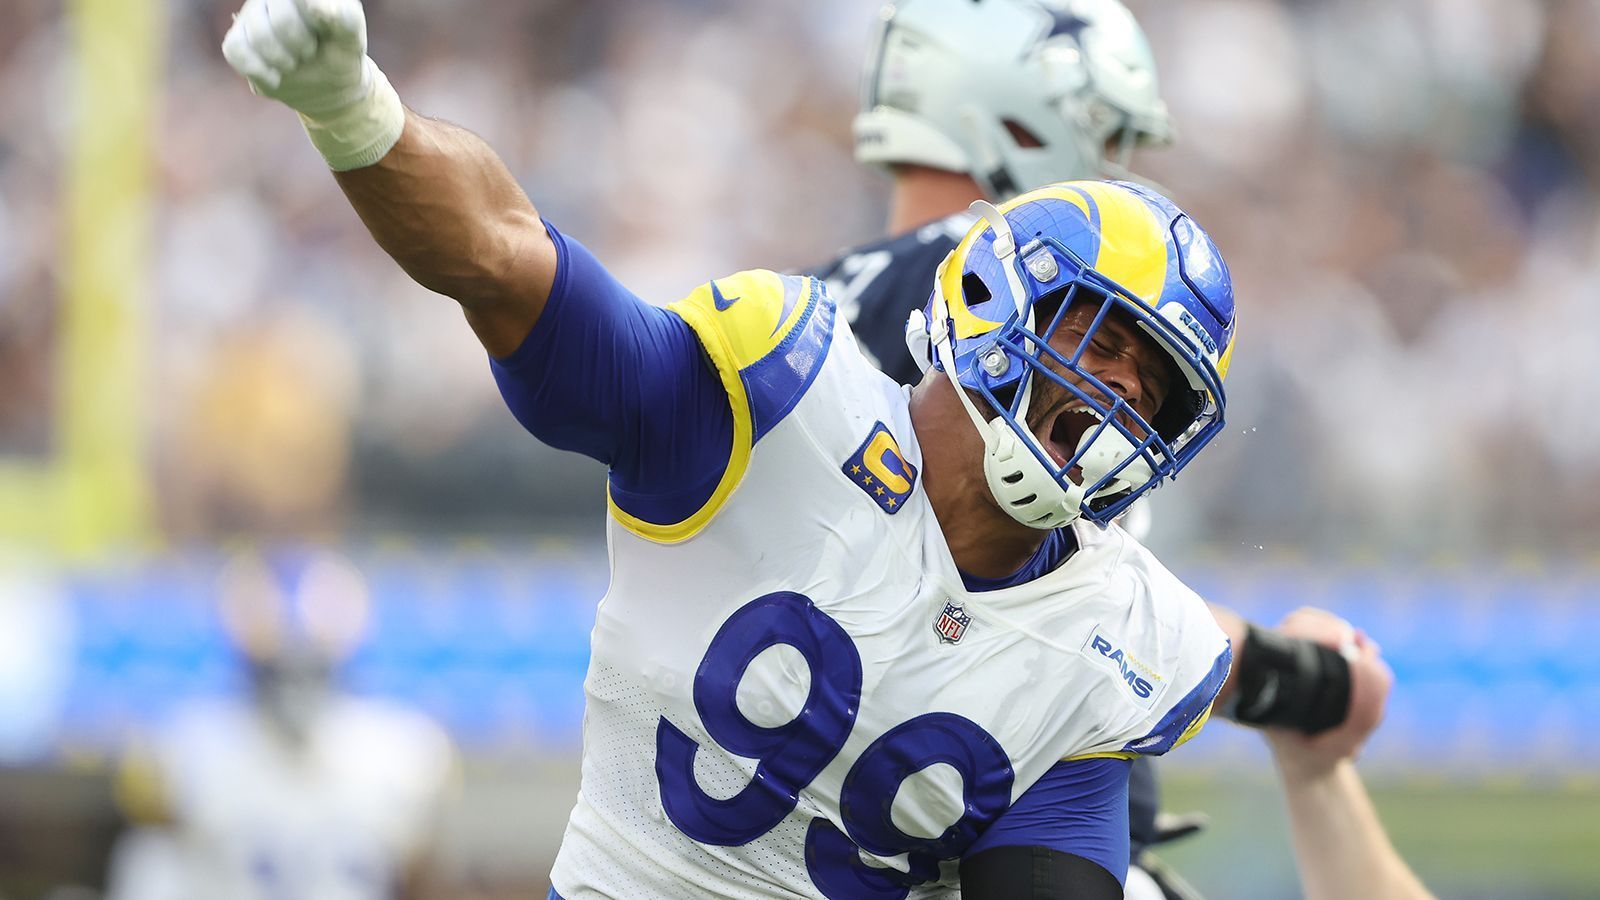 
                <strong>Defensive Tackle: Aaron Donald</strong><br>
                &#x2022; Aktuelle Franchise: Los Angeles Rams<br>&#x2022; In der NFL seit: 2014<br>
              